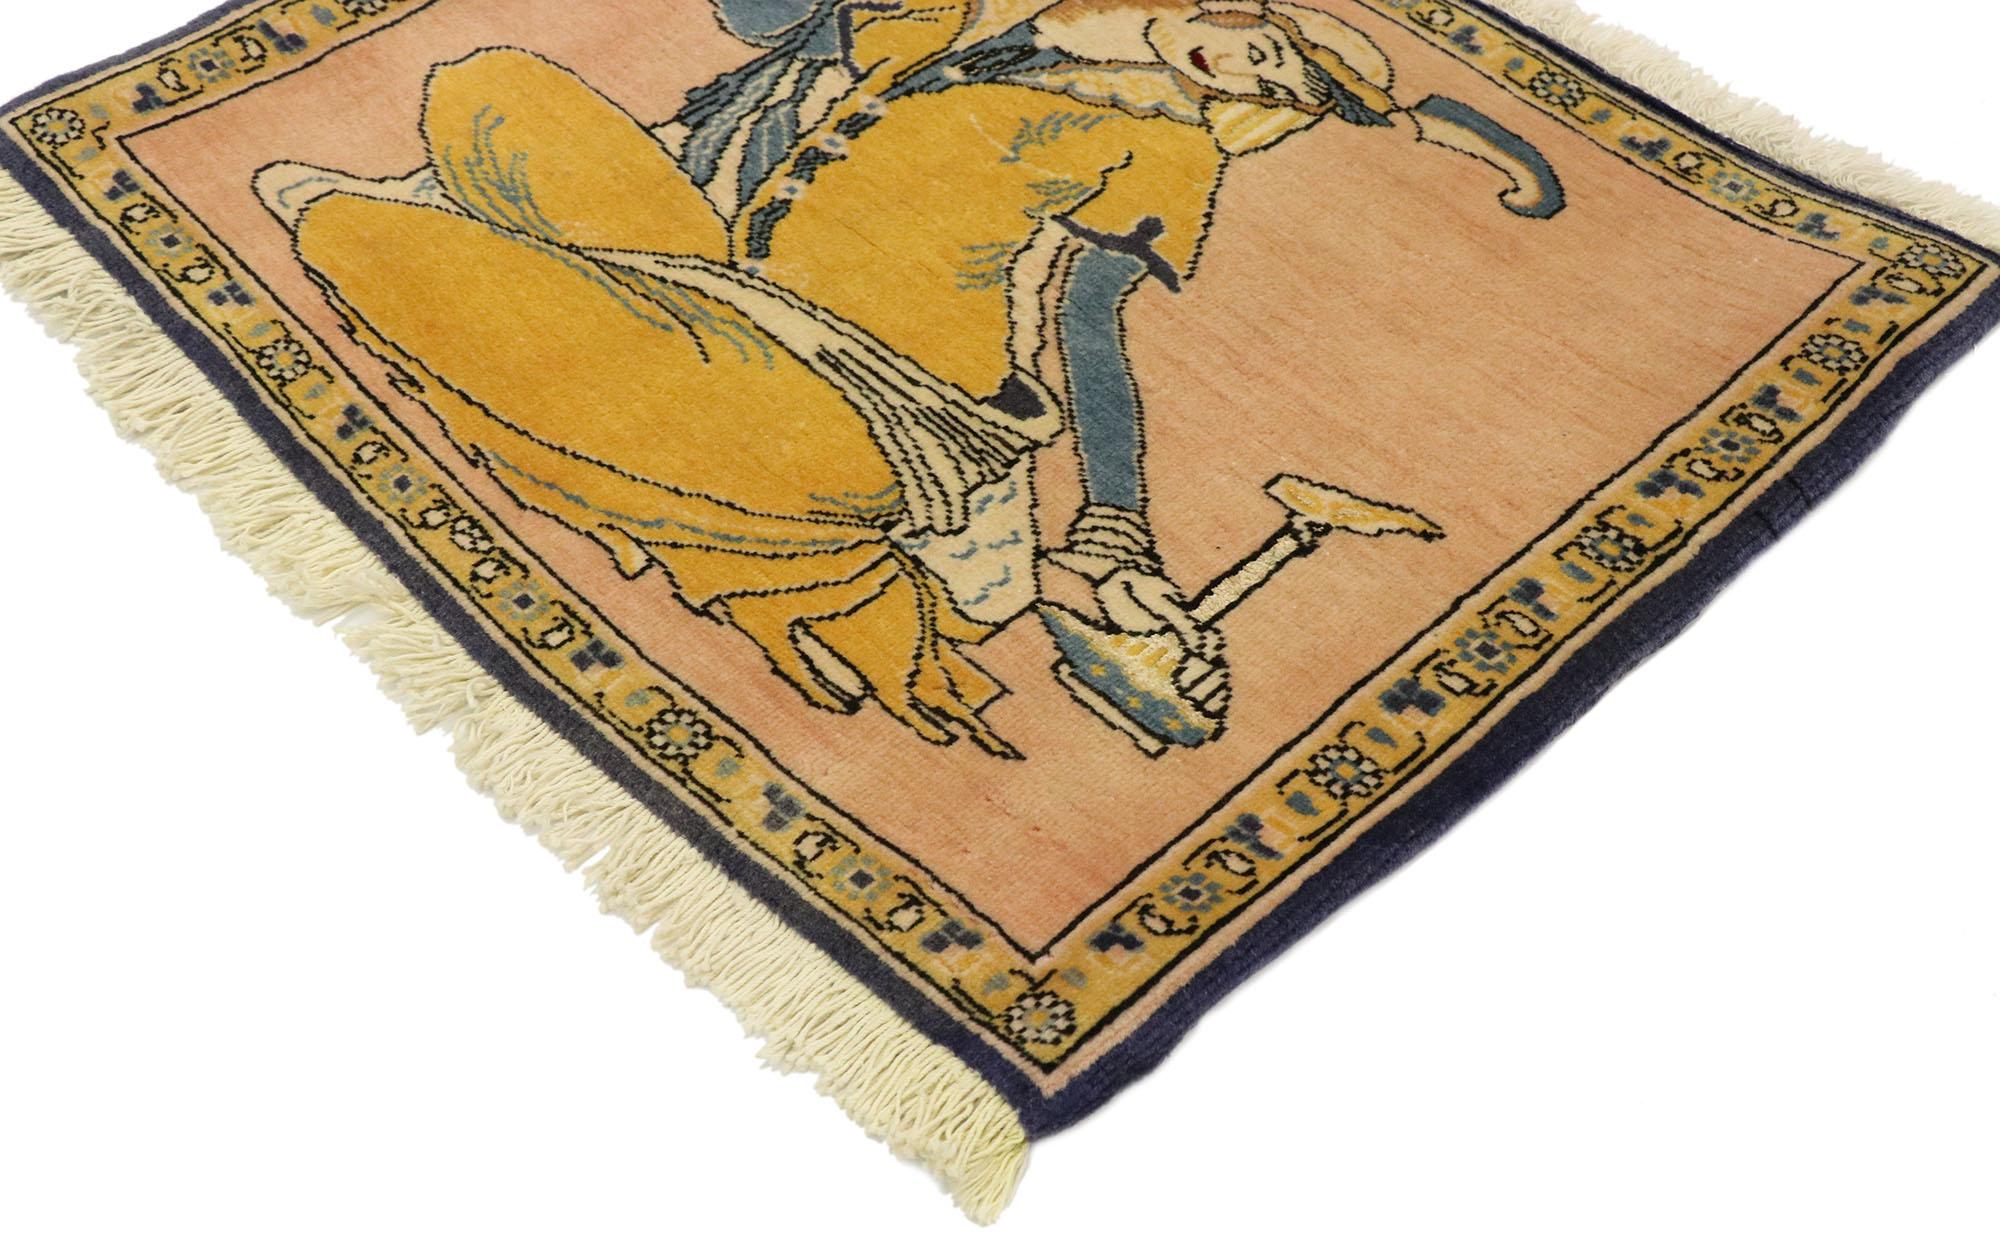 76195 Vintage Persian Khamseh Pictorial rug with Dervish Scene, Persian wall hanging. Ancient Persia boasts the true origin of viticulture and wine drinking as celebrated in this hand knotted wool vintage Persian Khamseh pictorial rug. Tender and